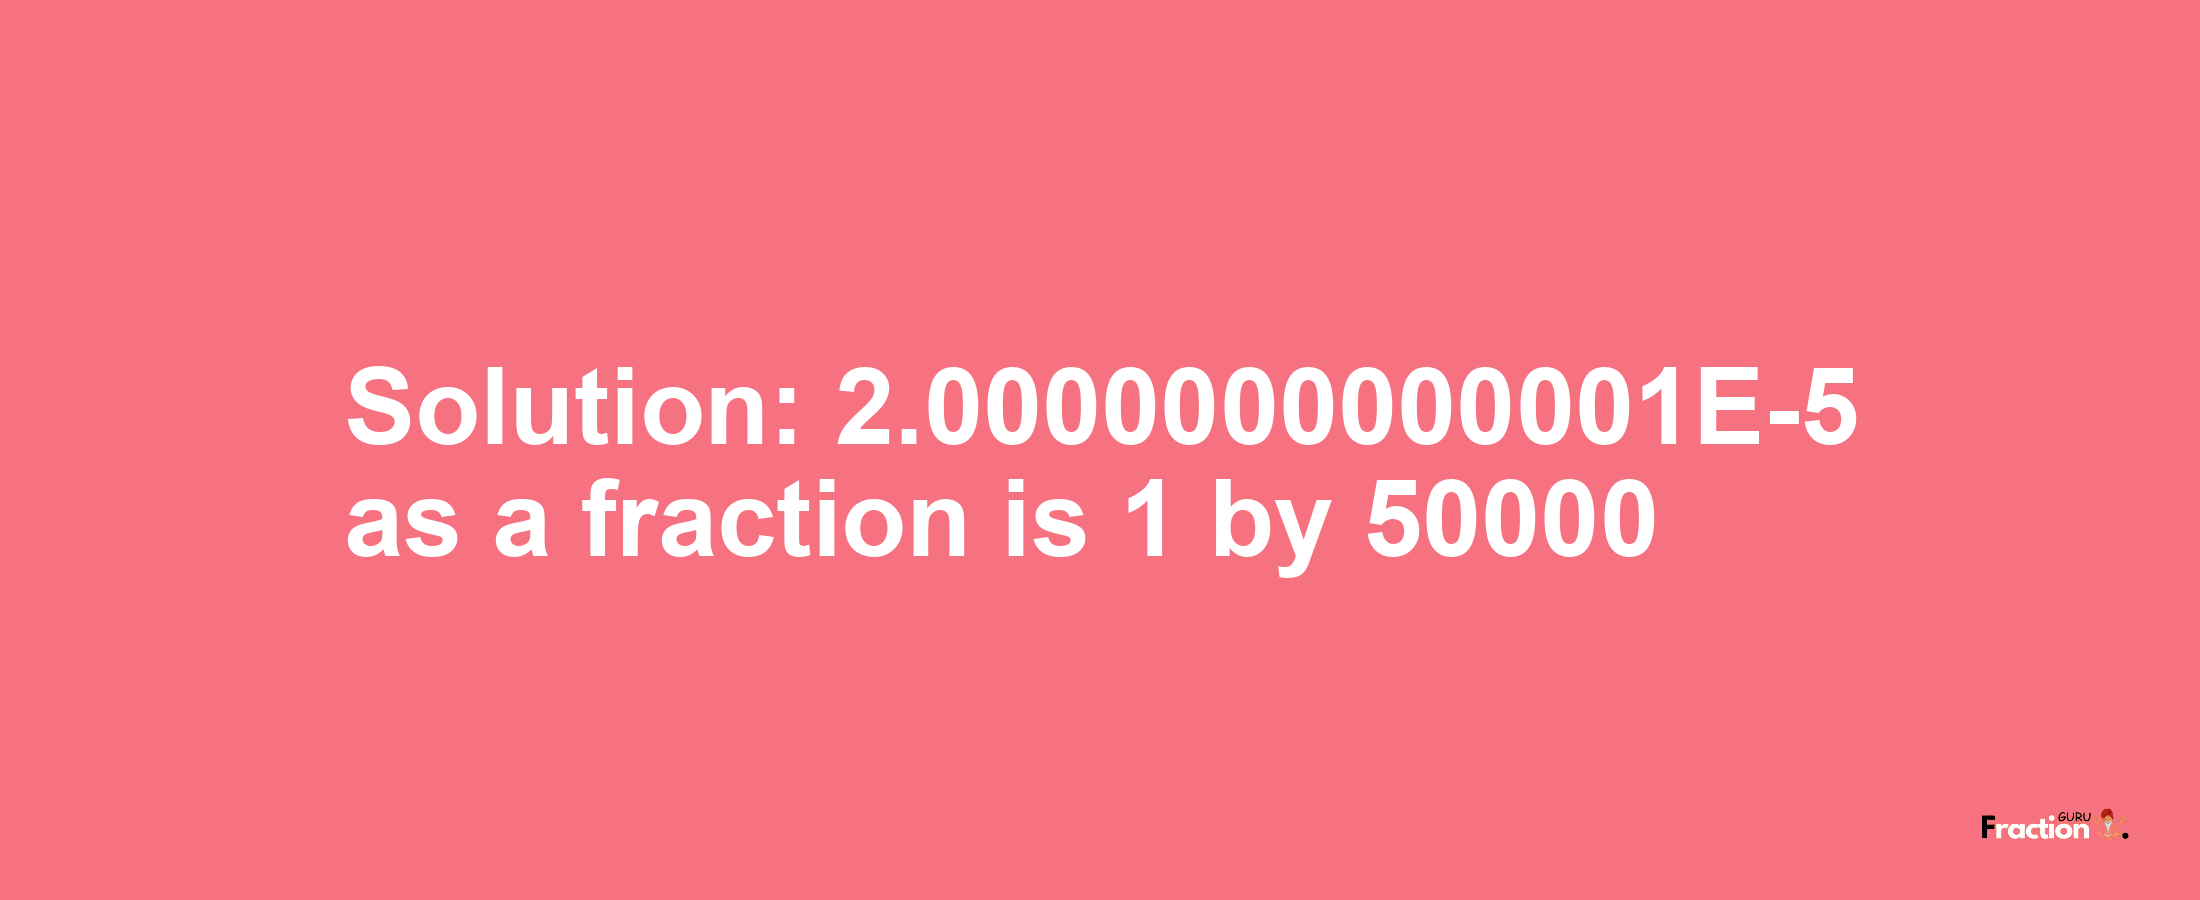 Solution:2.0000000000001E-5 as a fraction is 1/50000